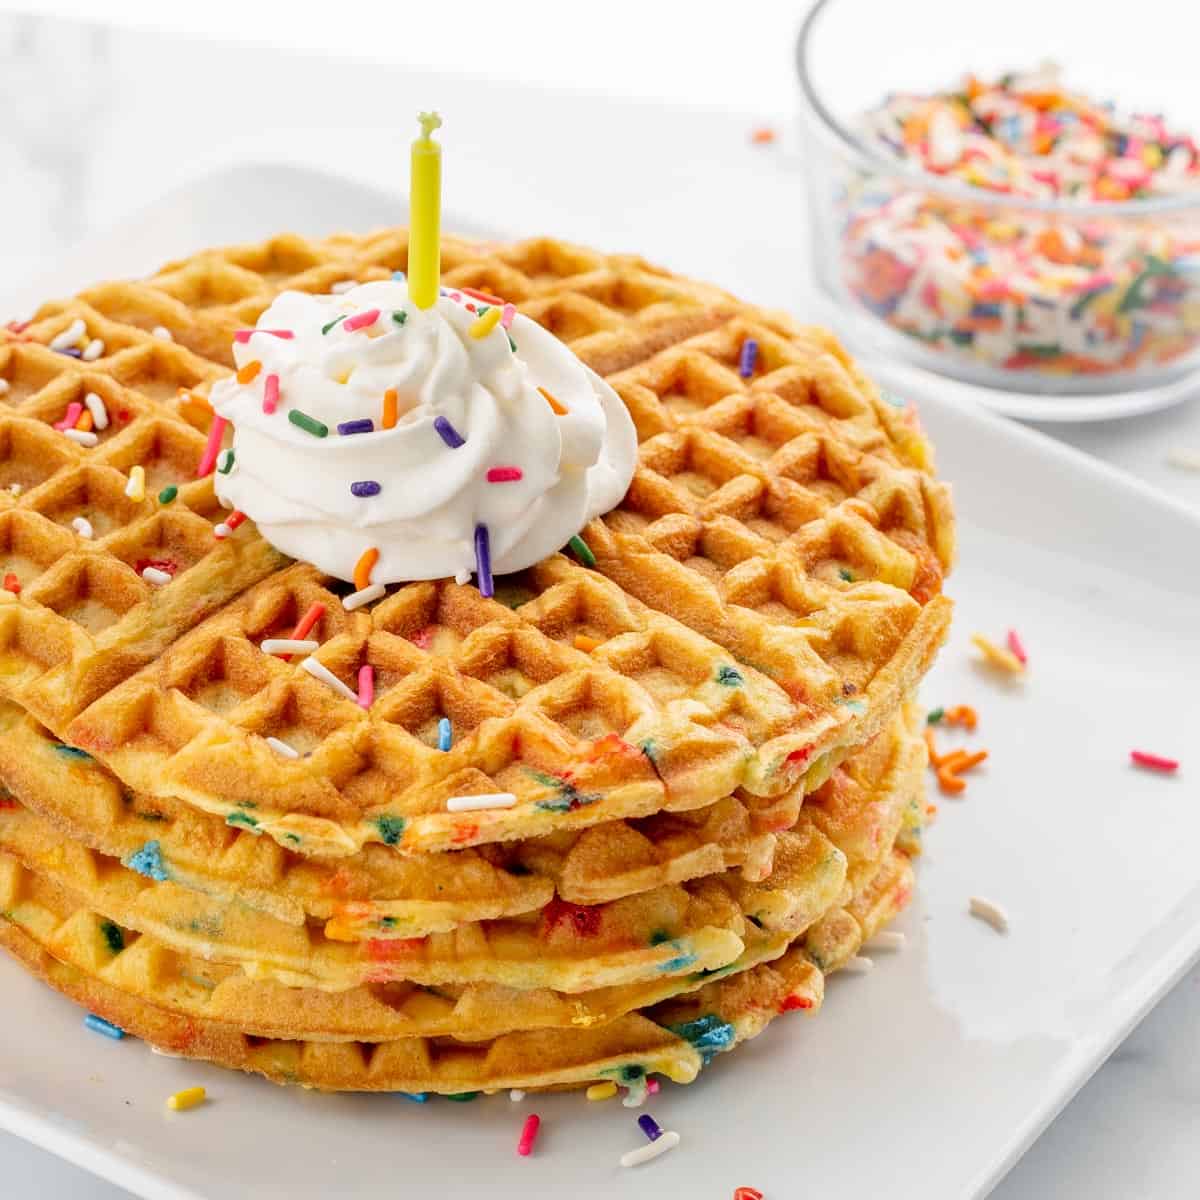 Photo of a stack of waffles with whipped cream, birthday candle and sprinkles.